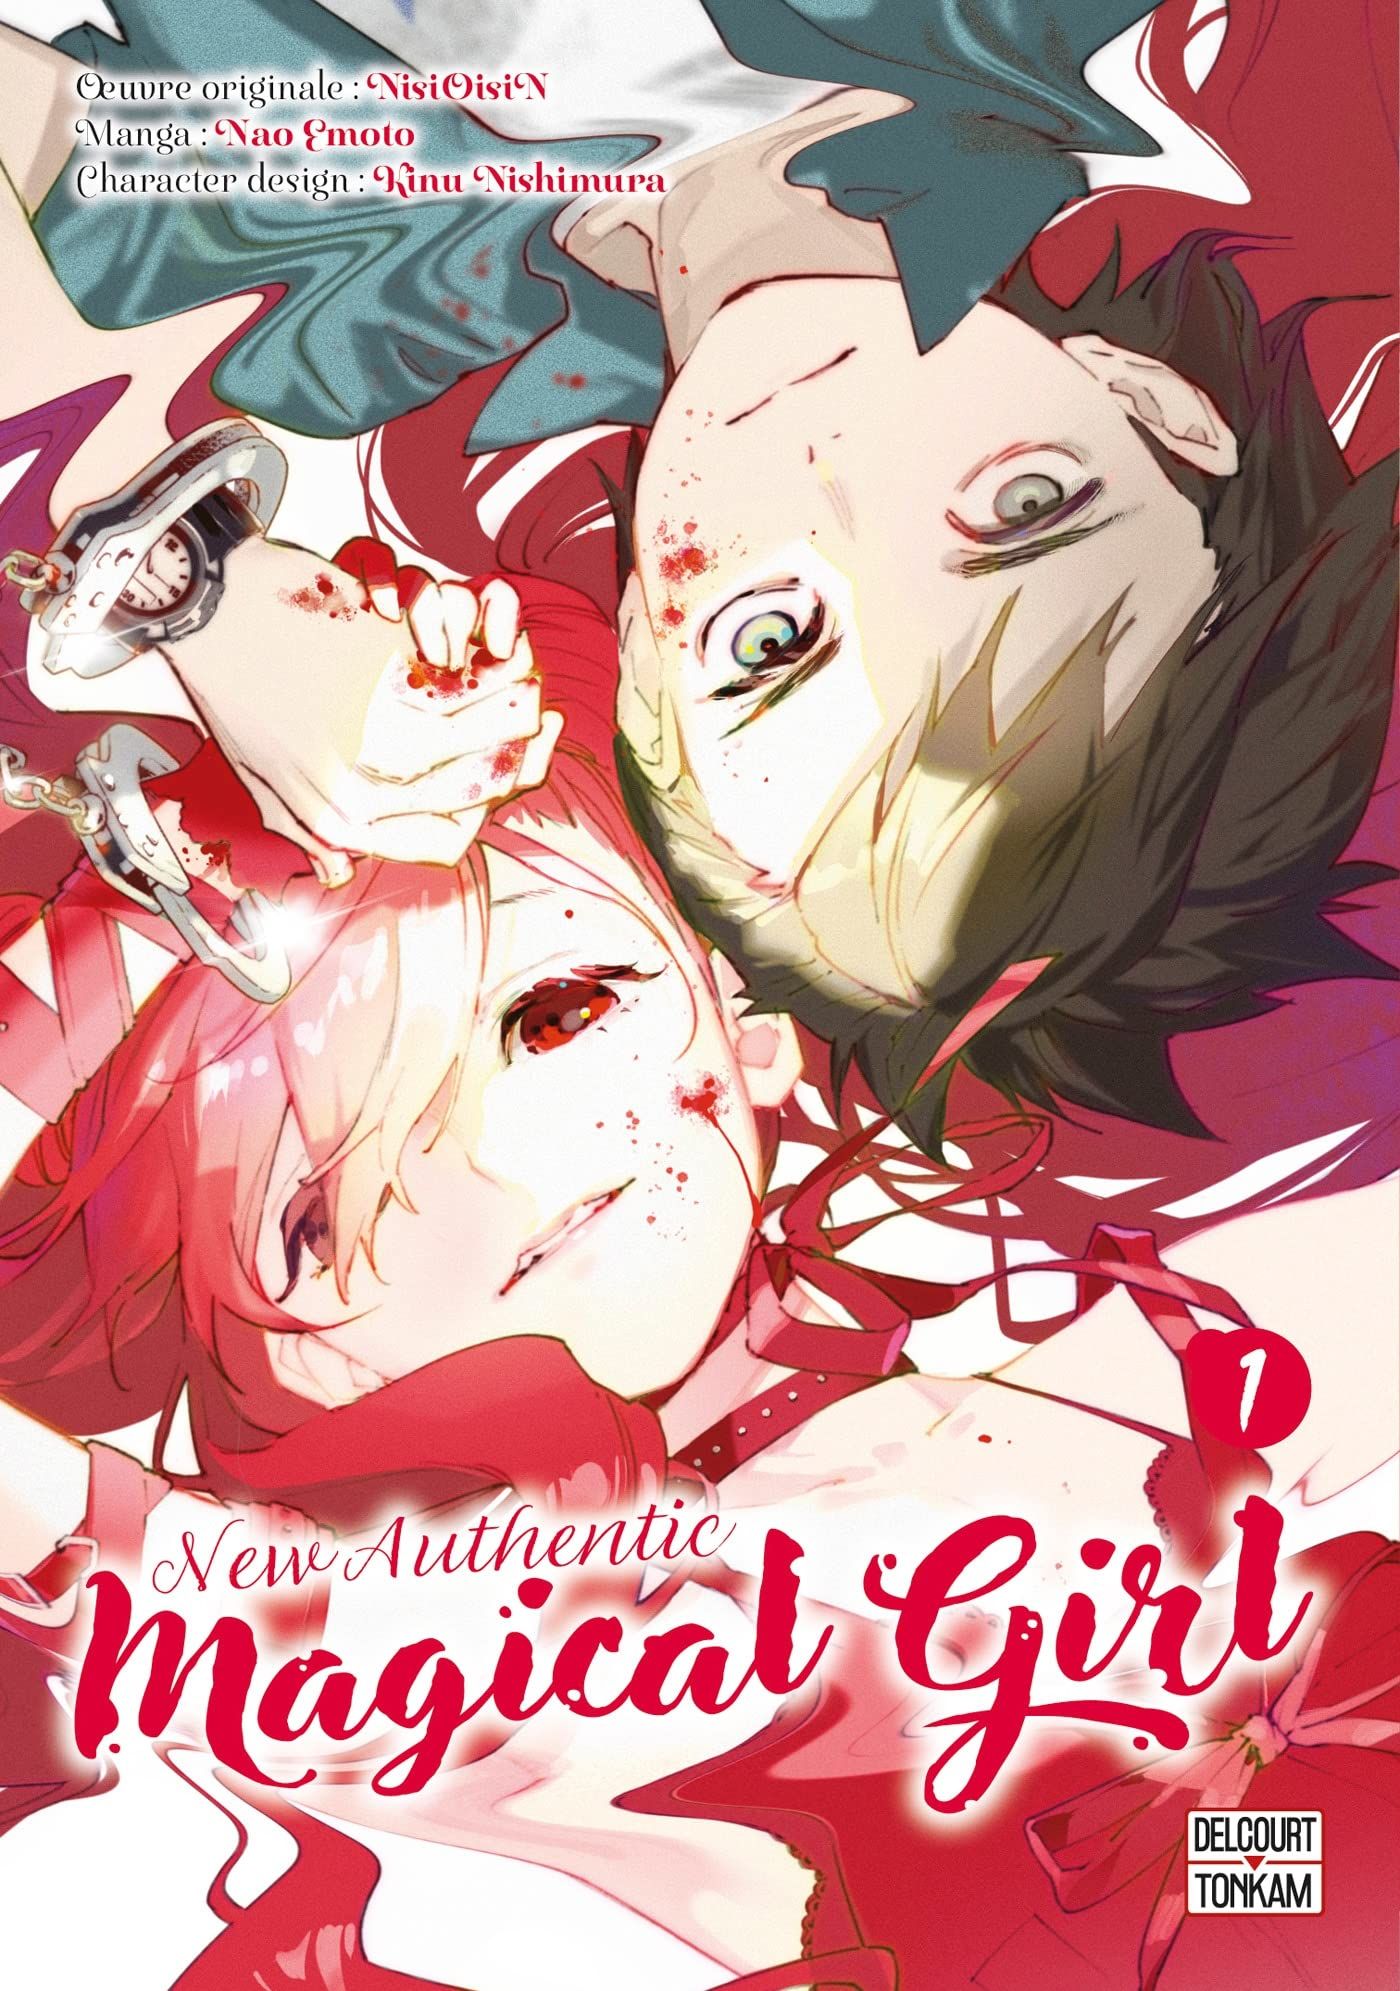 New Authentic Magical Girl Vol.1 [14/06/23]